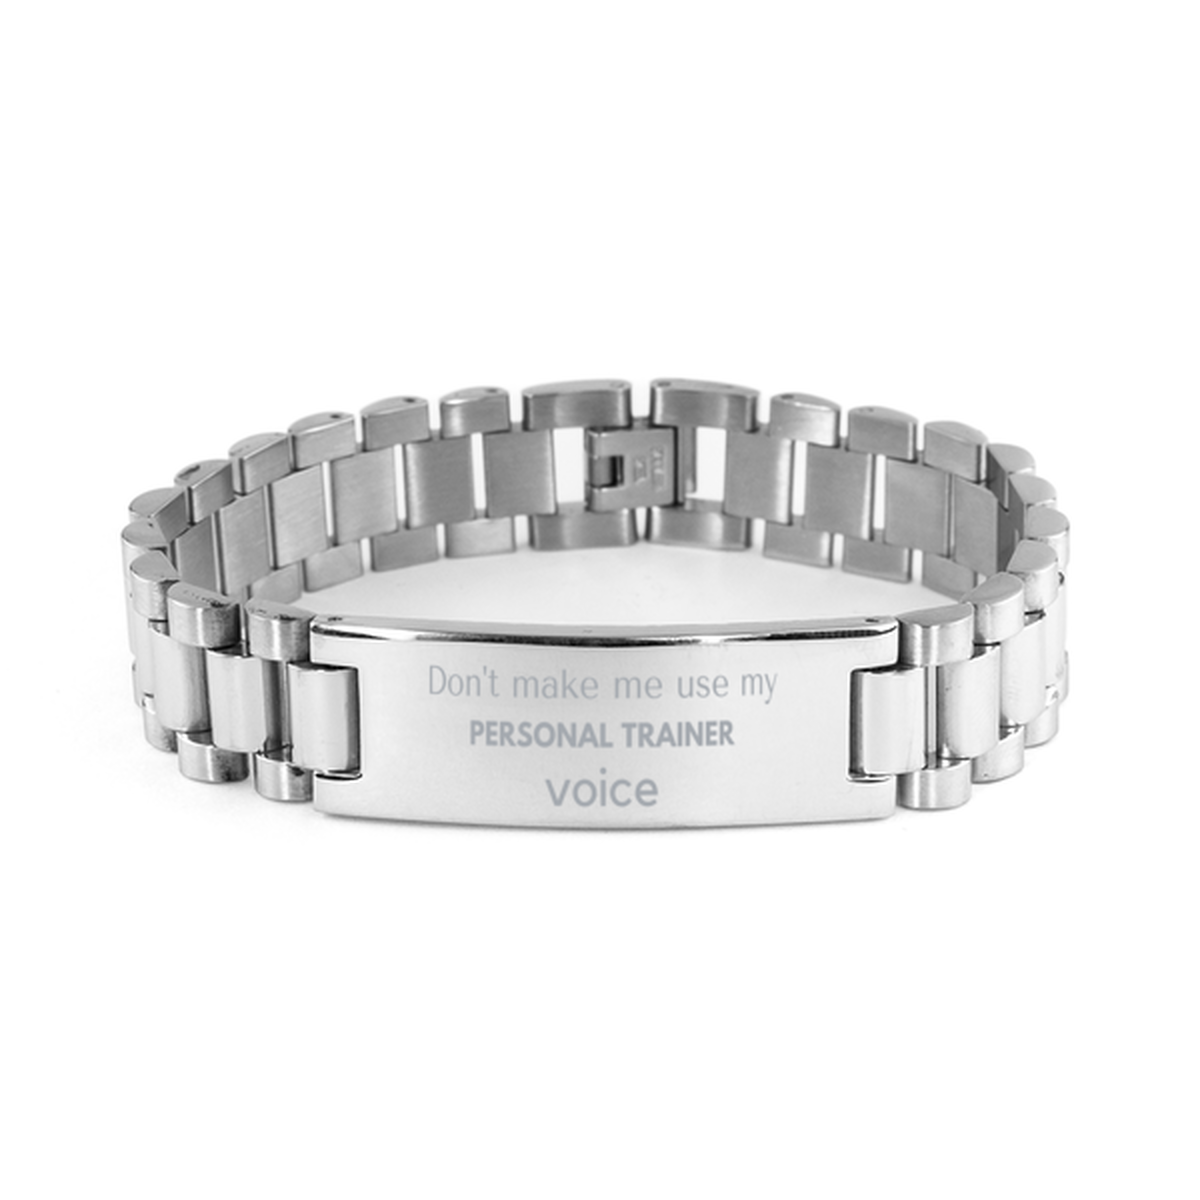 Don't make me use my Personal Trainer voice, Sarcasm Personal Trainer Gifts, Christmas Personal Trainer Ladder Stainless Steel Bracelet Birthday Unique Gifts For Personal Trainer Coworkers, Men, Women, Colleague, Friends